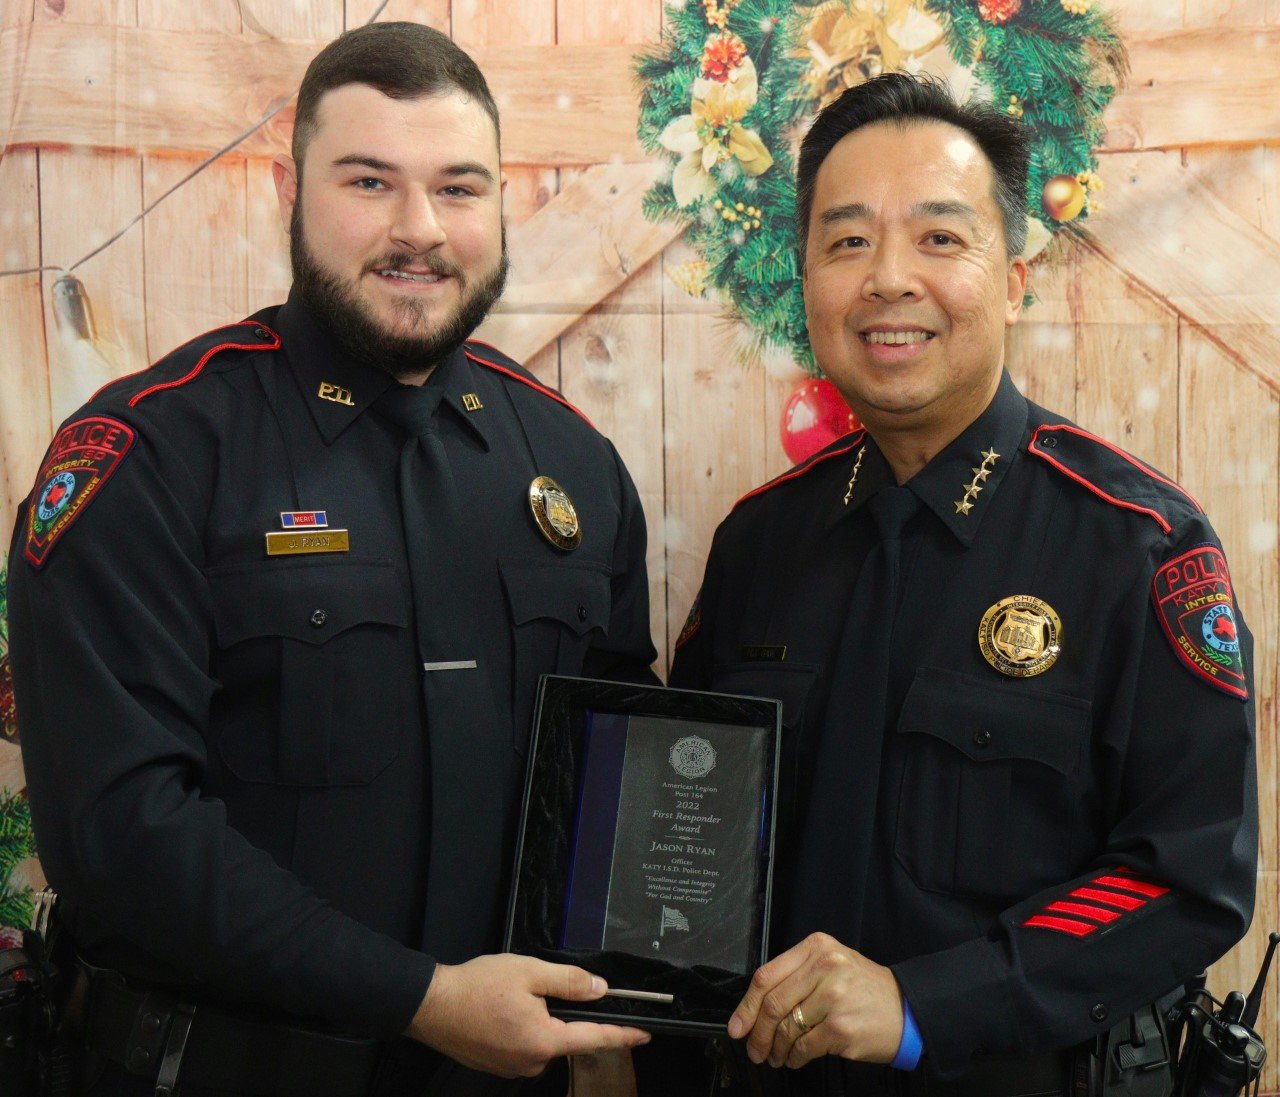 Katy ISD Police officer Jason Ryan receives congratulations from Katy ISD Police Chief Henry Gaw at the American Legion Post 164 First Responders Dinner, held Dec. 10 at the Elks Lodge, 1050 Katy Fort Bend Road.